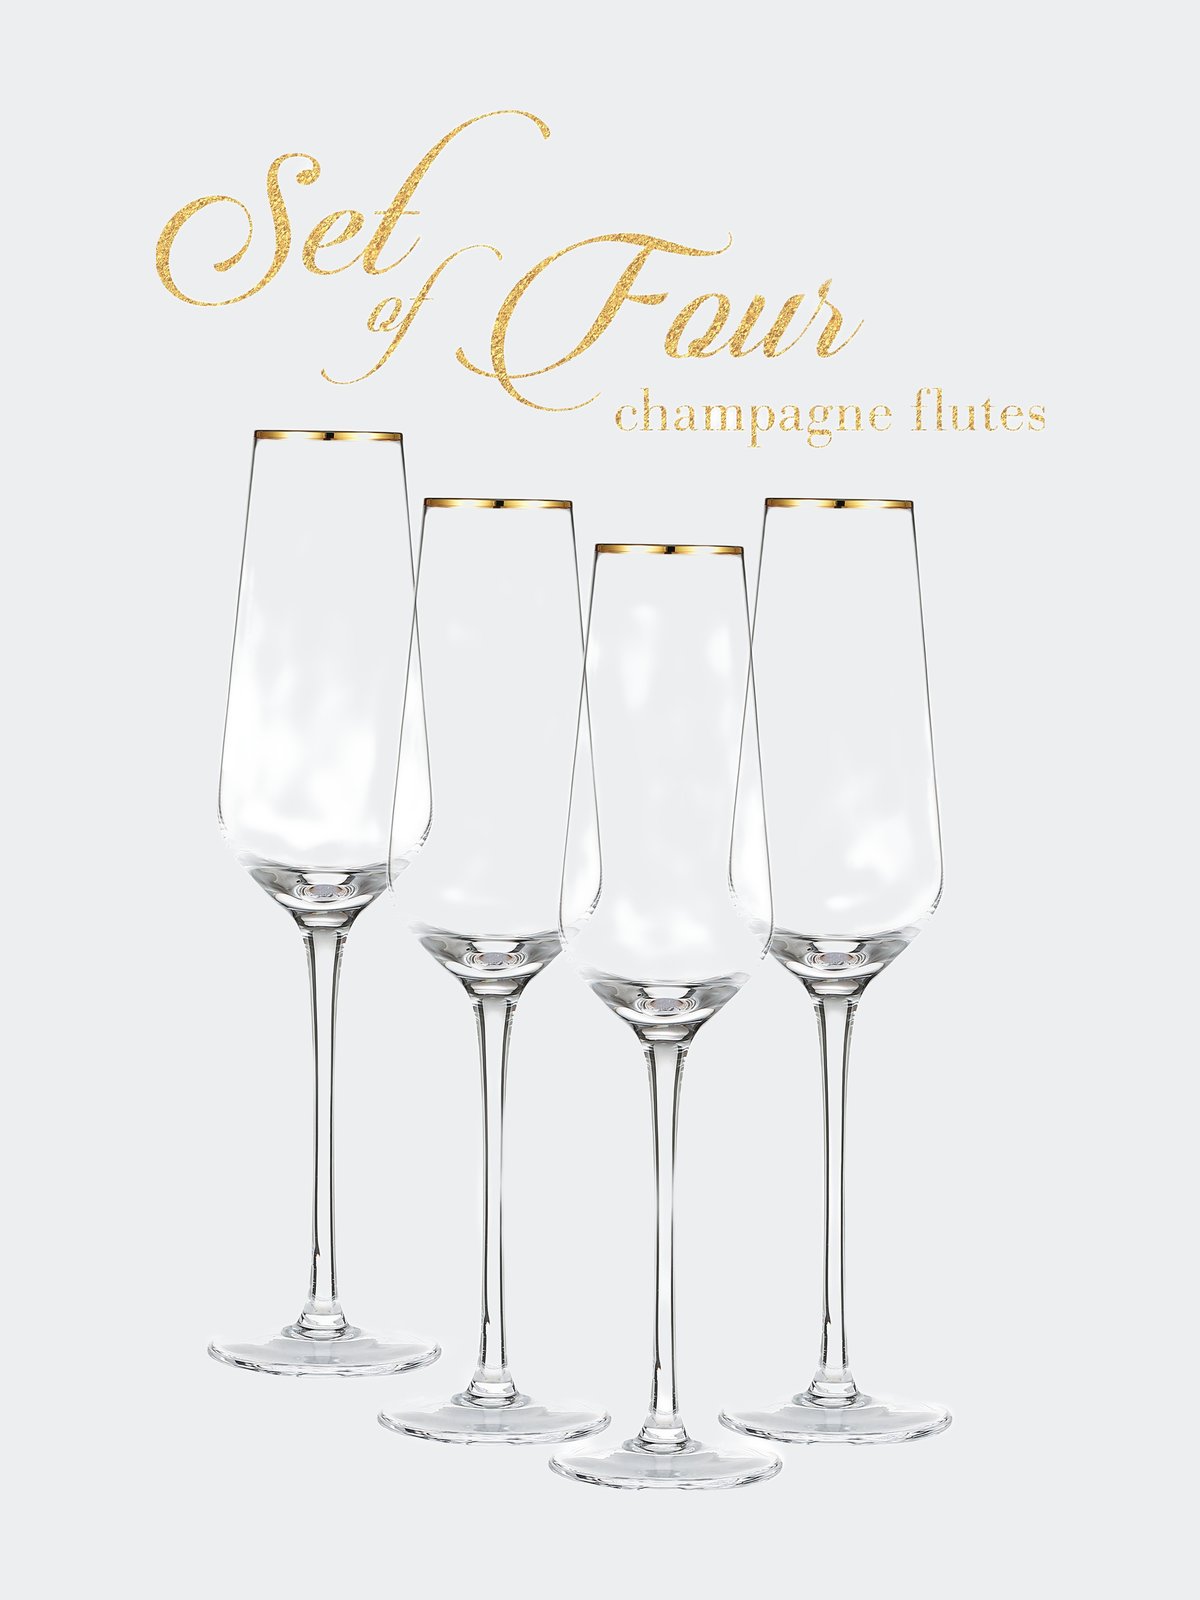 https://images.verishop.com/berkware-champagne-glasses-luxurious-crystal-champagne-toasting-flutes-set-of-4/M00810026171413-2512379483?auto=format&cs=strip&fit=max&w=1200